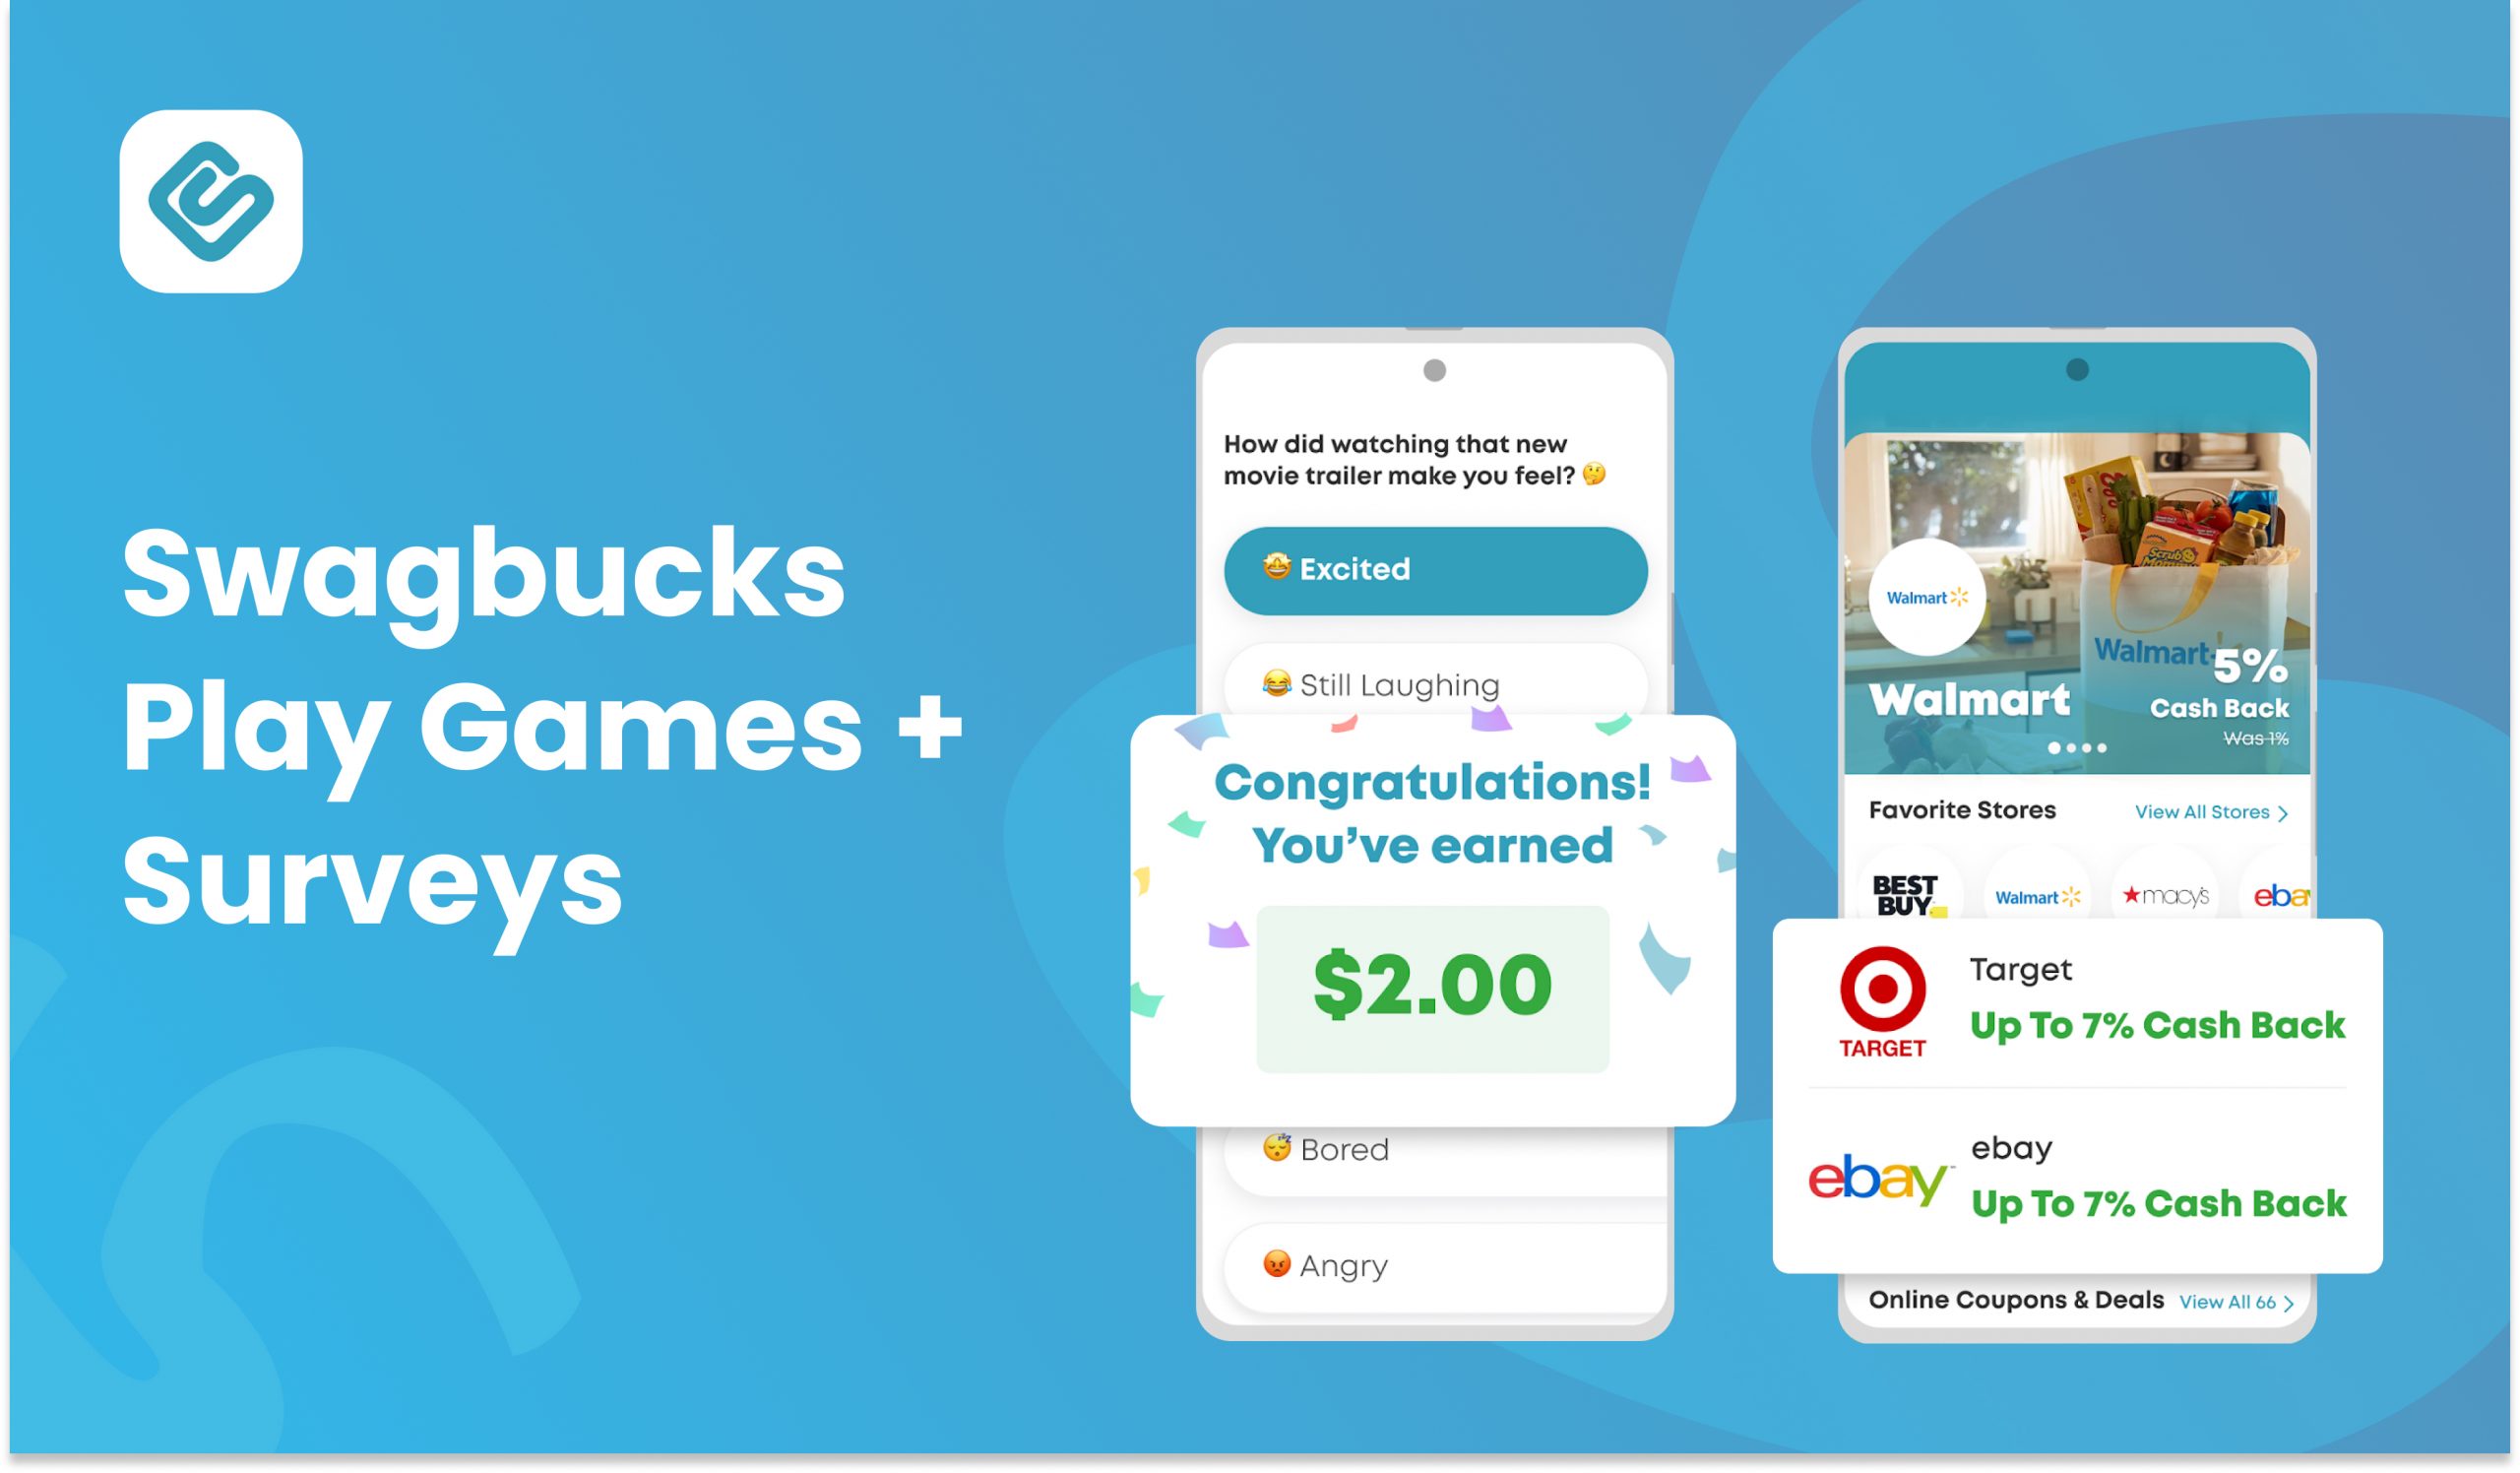 Swagbucks: Earn Rewards for Your Daily Activities